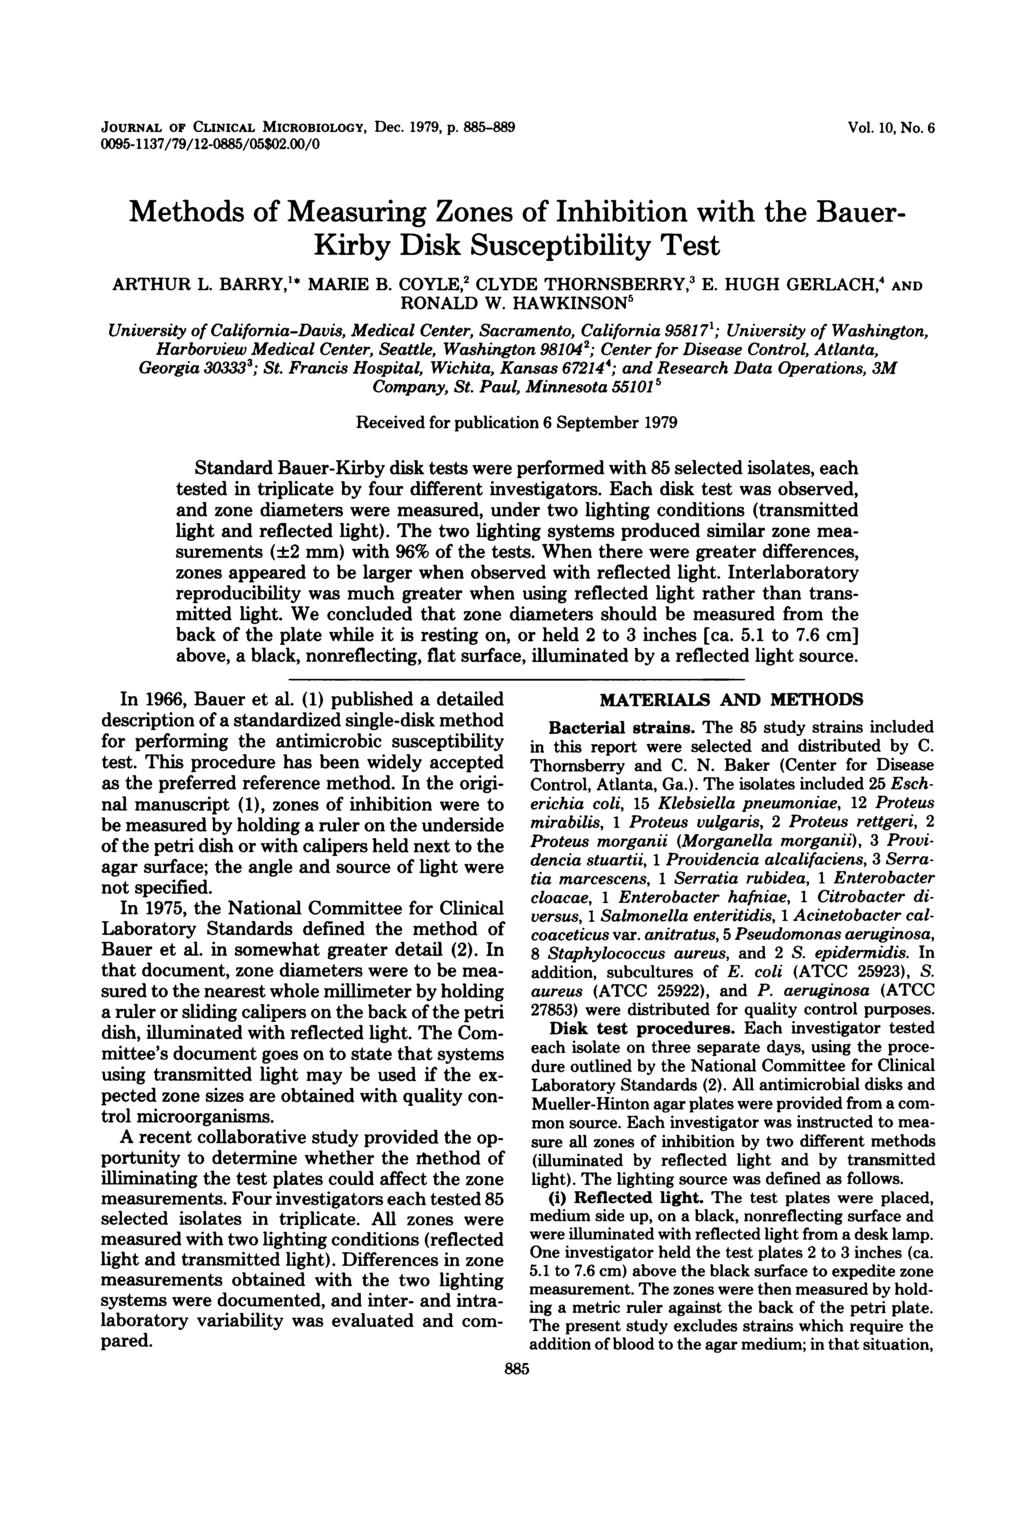 JOURNAL OF CLINICAL MICROBIOLOGY, Dec. 1979, p. 885-889 0095-1137/79/12-0885/05$02.00/0 Vol. 10, No. 6 Methods of Measuring Zones of Inhibition with the Bauer- Kirby Disk Susceptibility Test ARTHUR L.